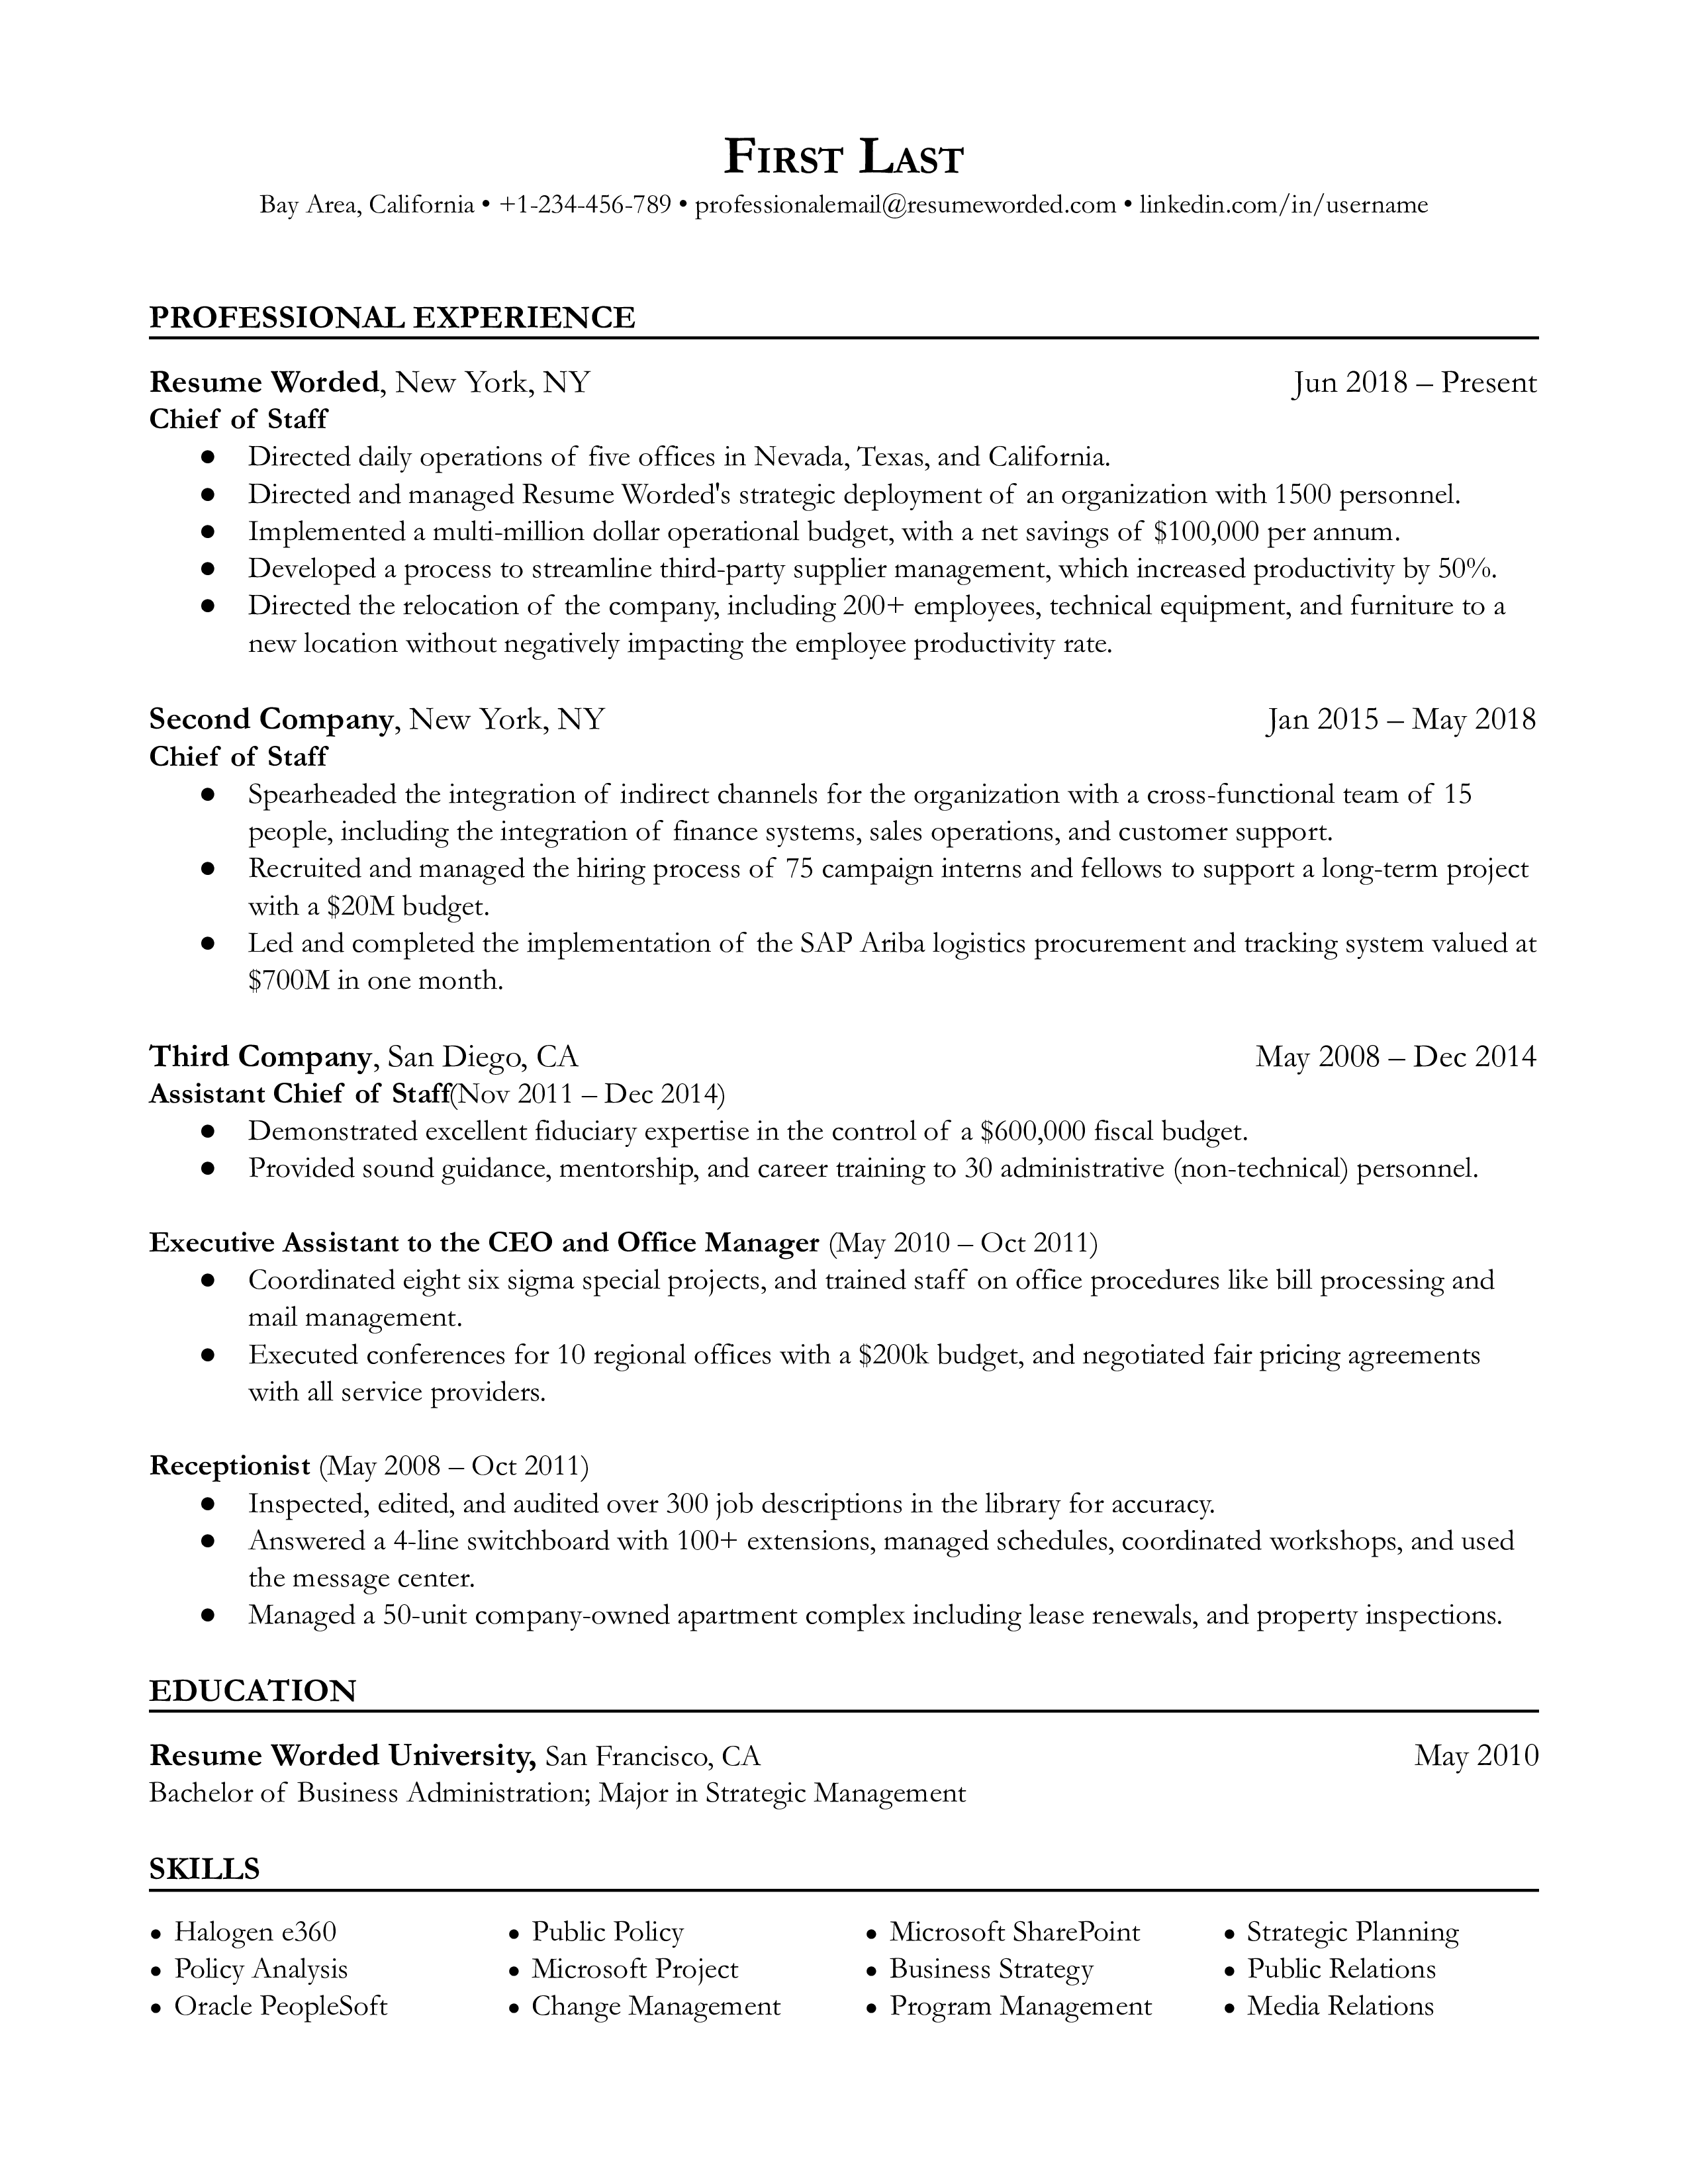 A chief of staff resume sample that highlights the applicants vast experience and career progression